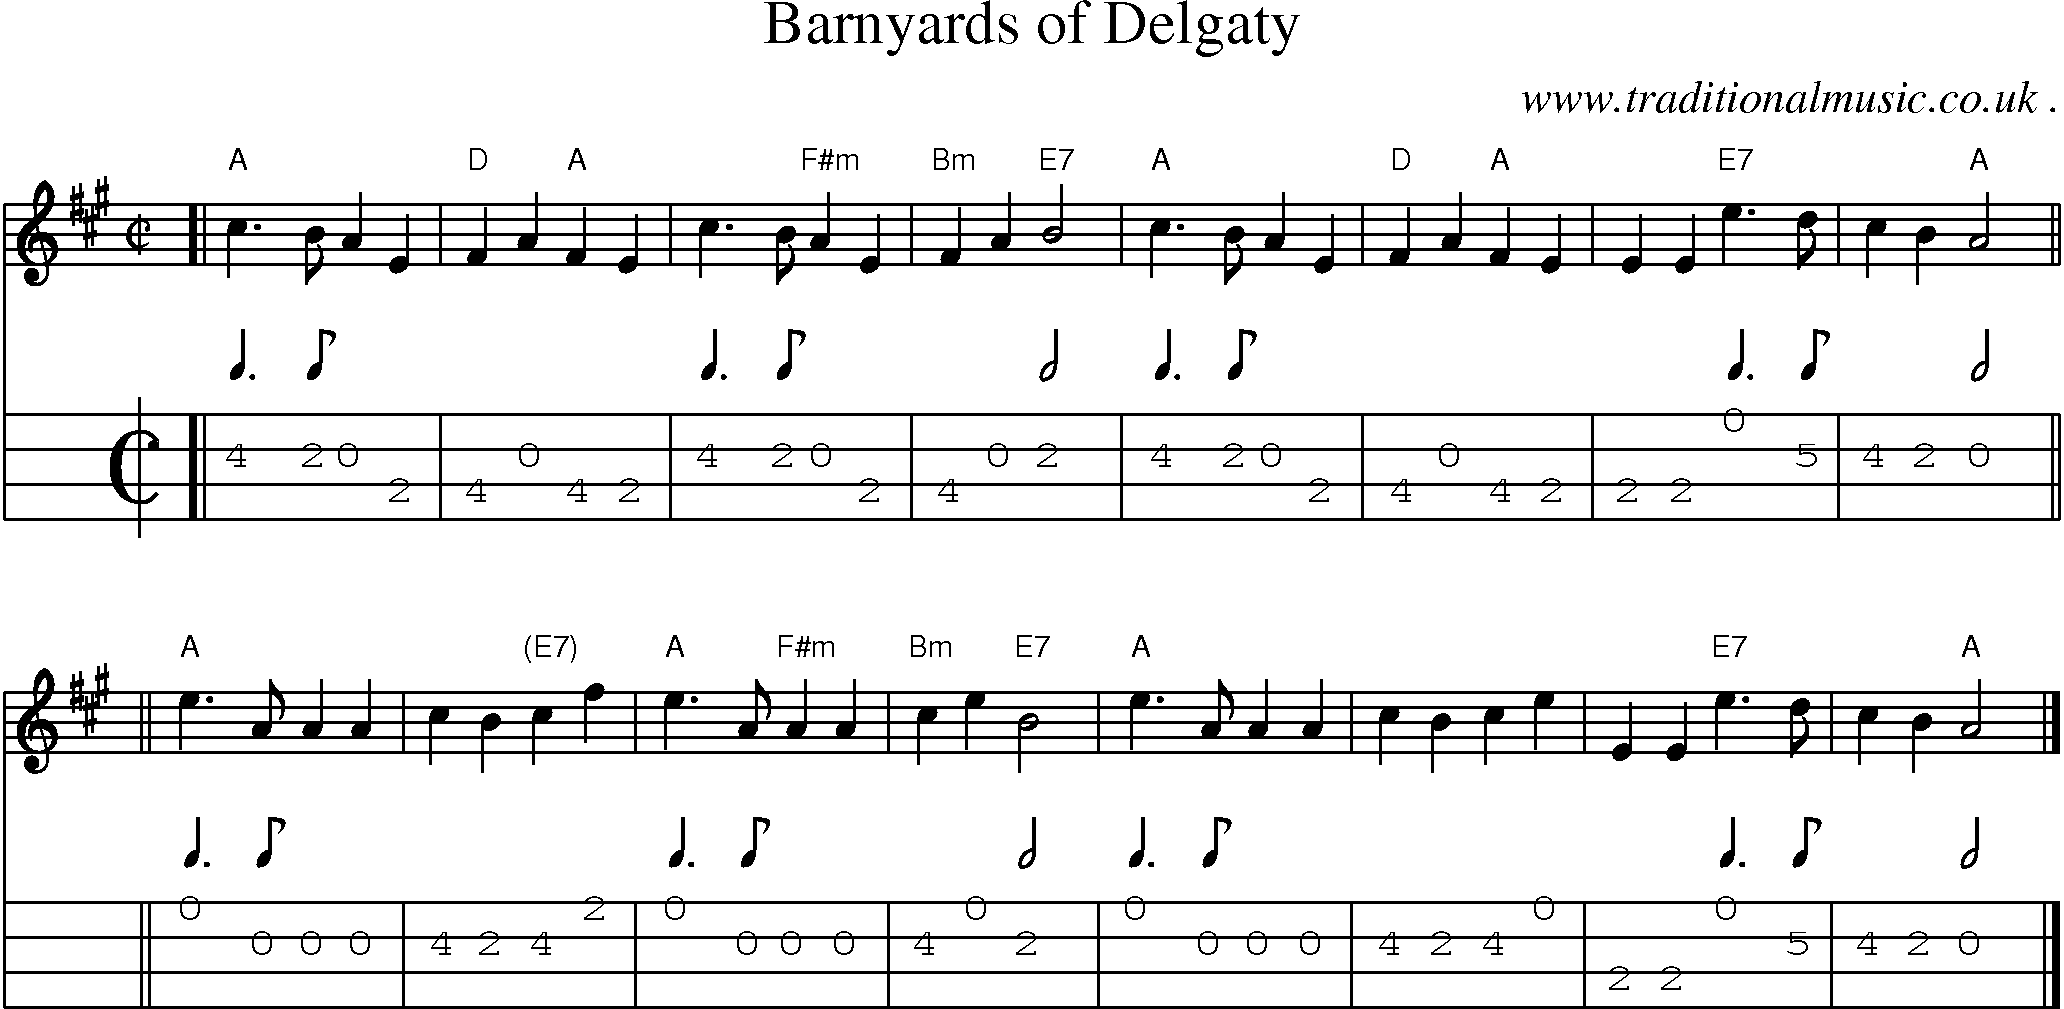 Sheet-music  score, Chords and Mandolin Tabs for Barnyards Of Delgaty